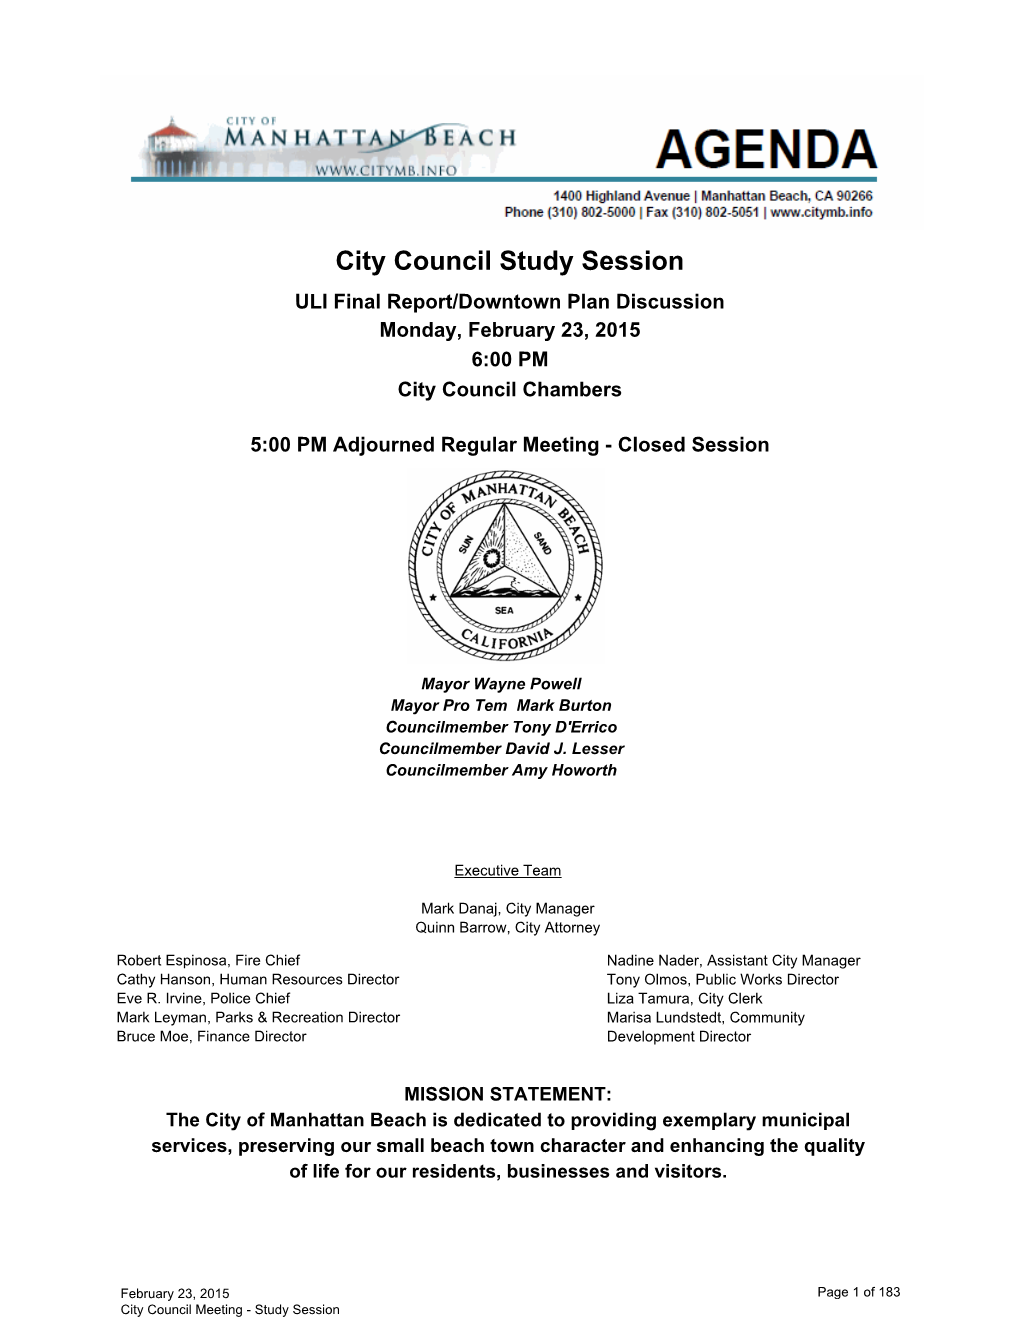 City Council Study Session ULI Final Report/Downtown Plan Discussion Monday, February 23, 2015 6:00 PM City Council Chambers